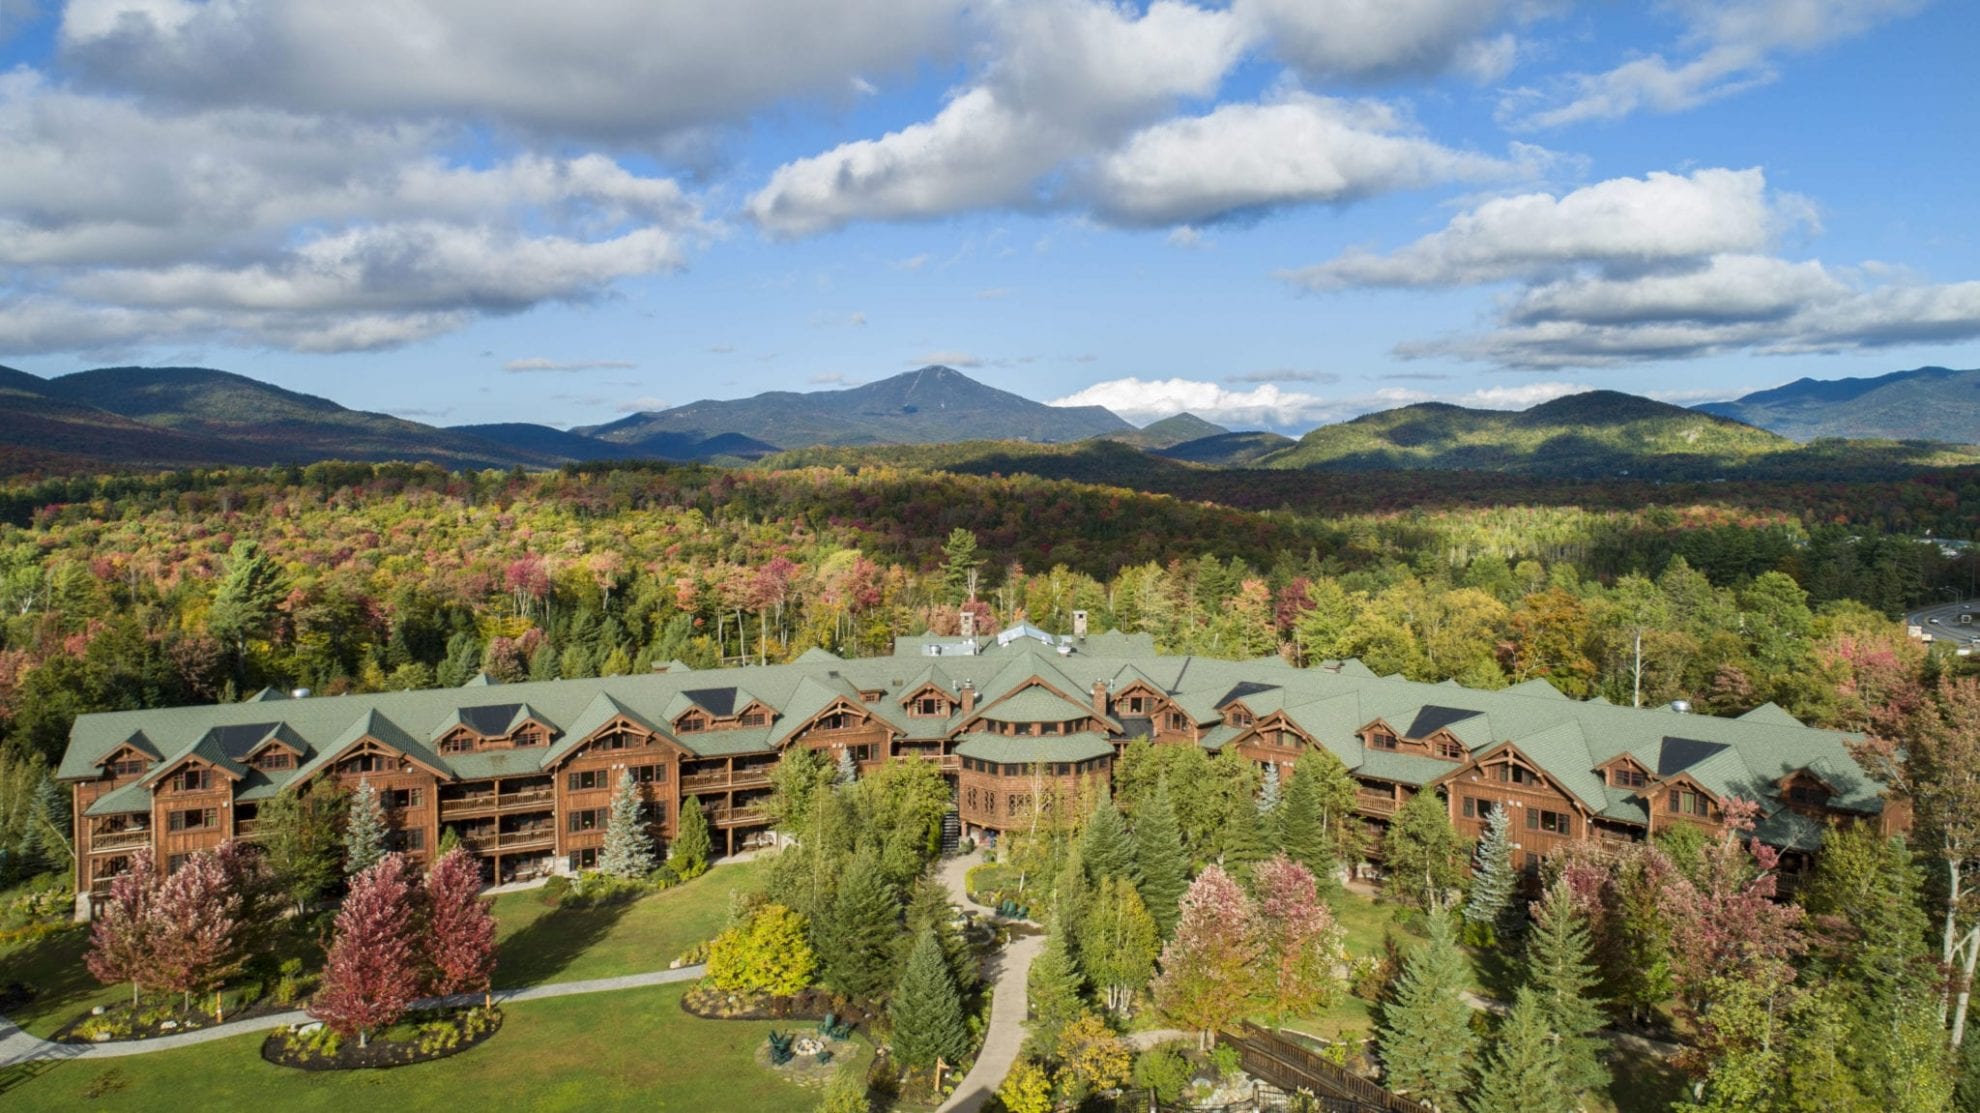 Aerial view of the Whiteface Lodge and forest.